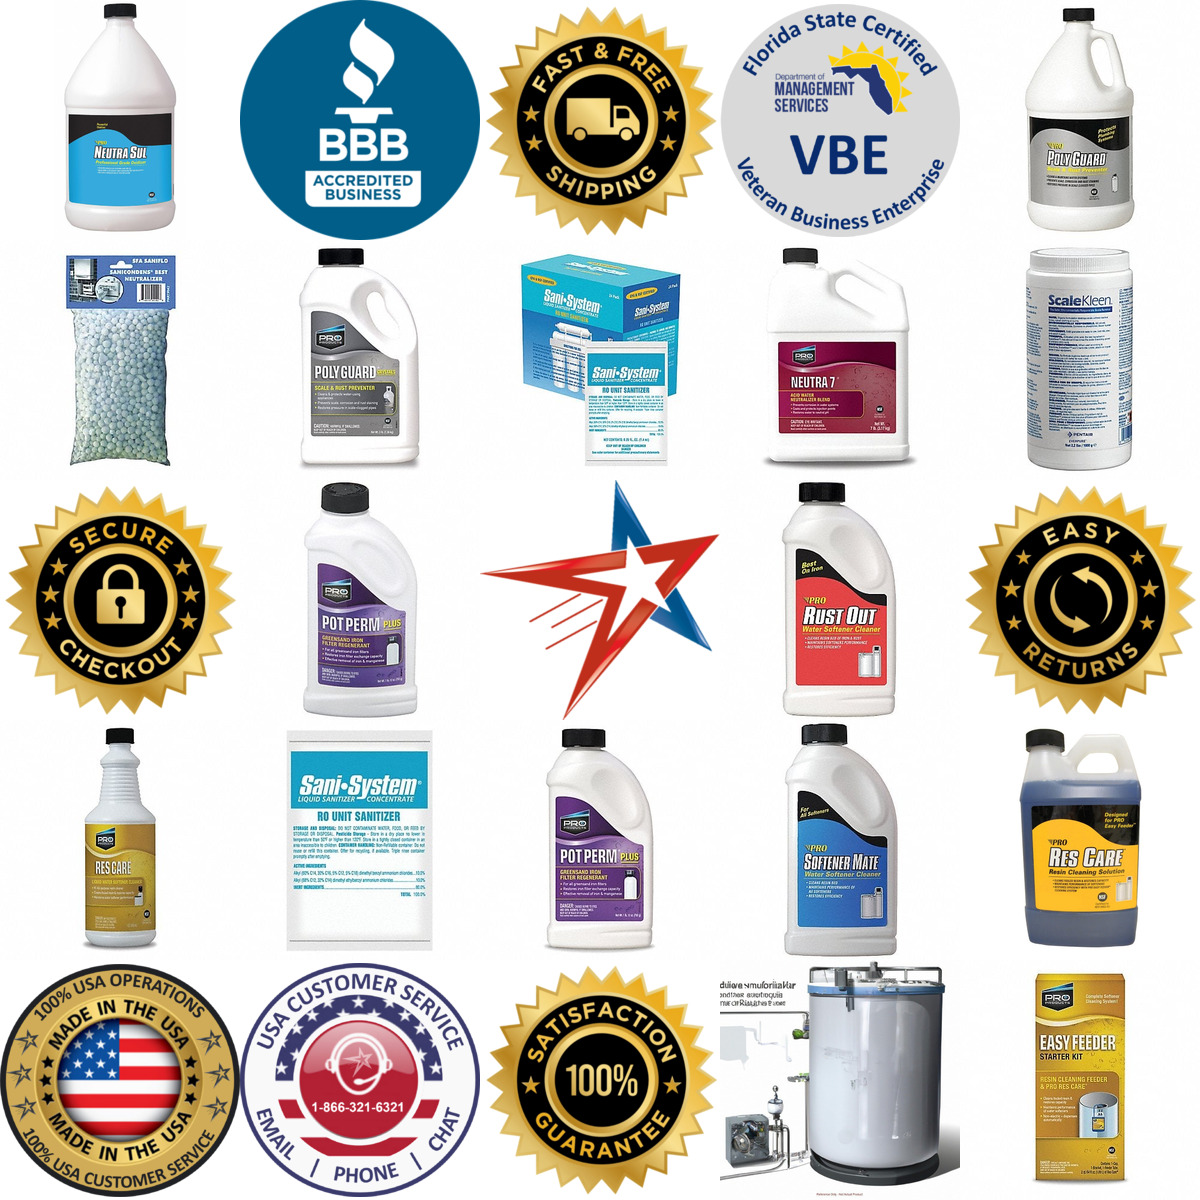 A selection of Water Softener and Filter Treatment Chemicals products on GoVets